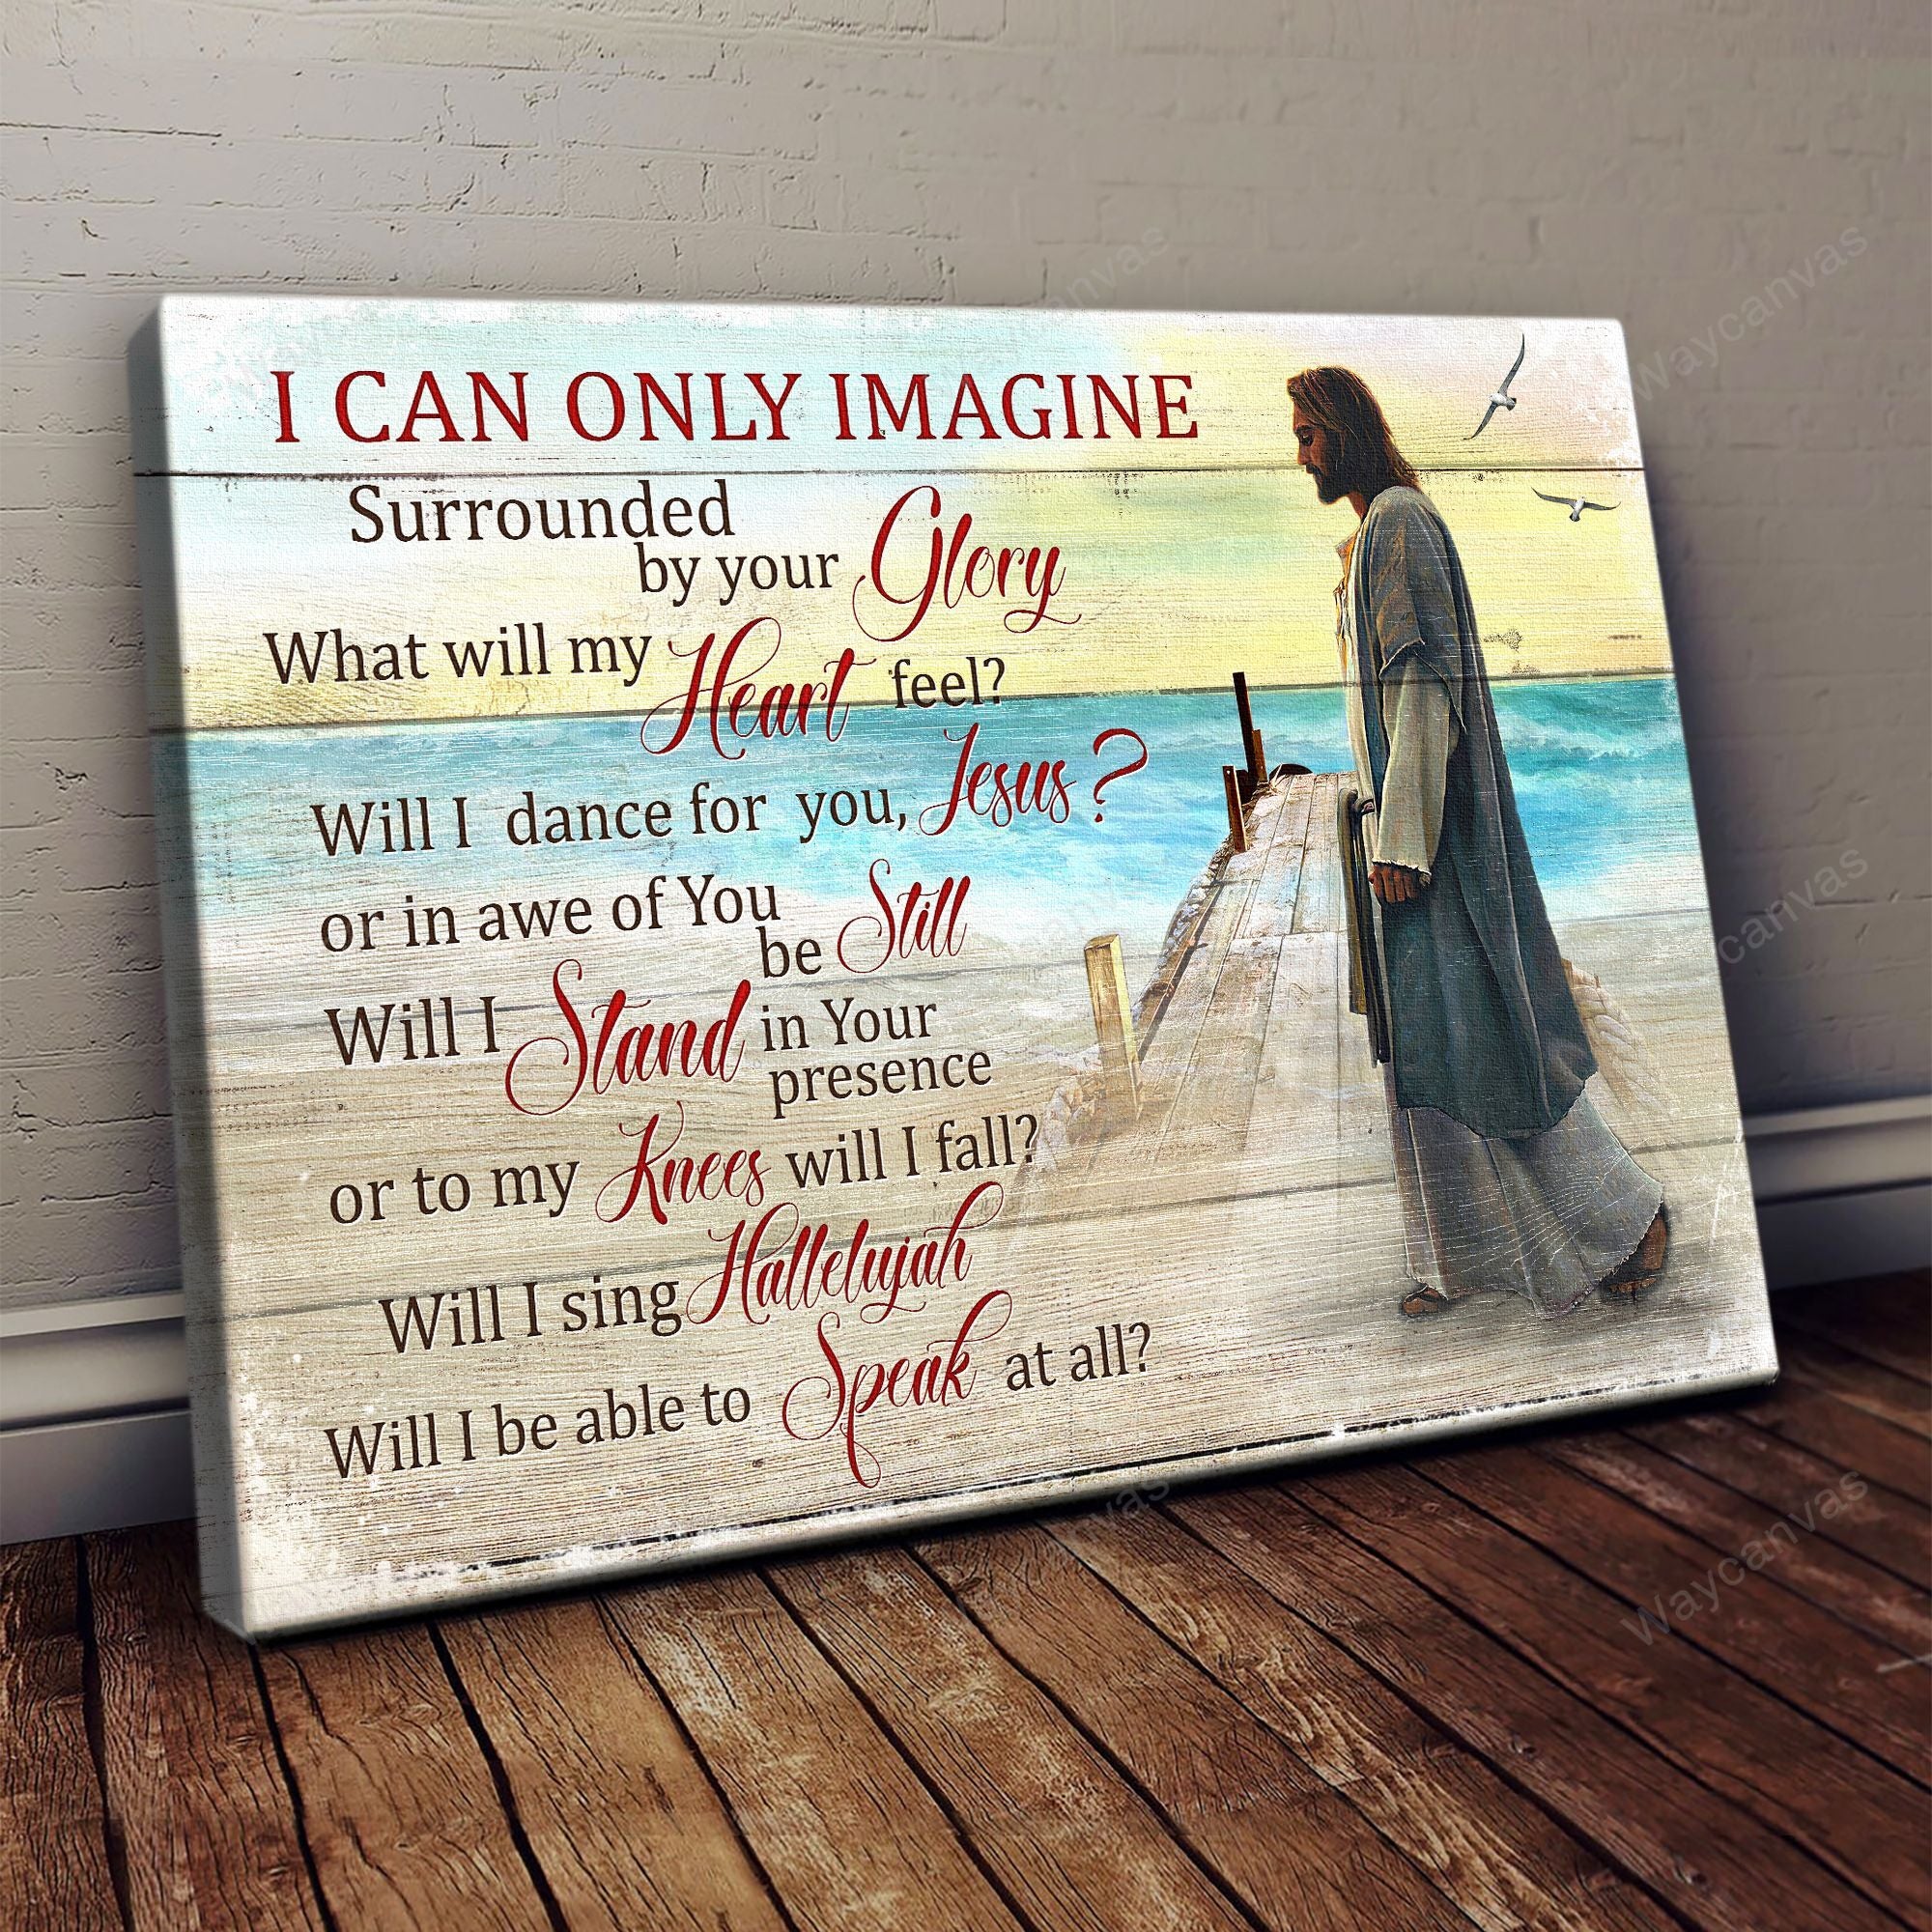 Jesus Painting, Walking on the beach, I can only imagine - Jesus Landscape Canvas Prints, Wall Art